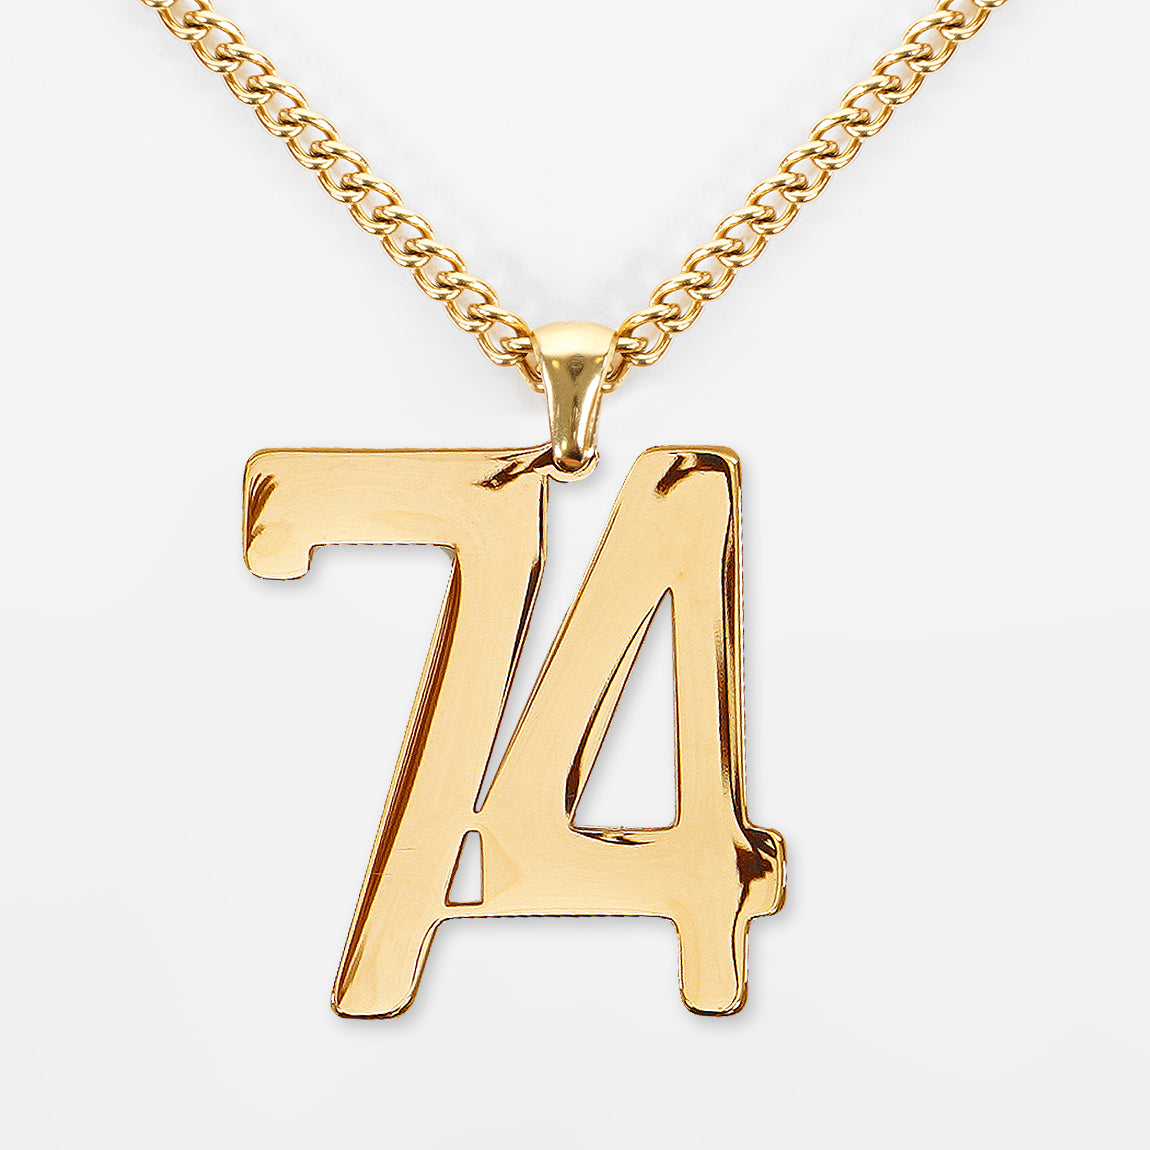 74 Number Pendant with Chain Necklace - Gold Plated Stainless Steel